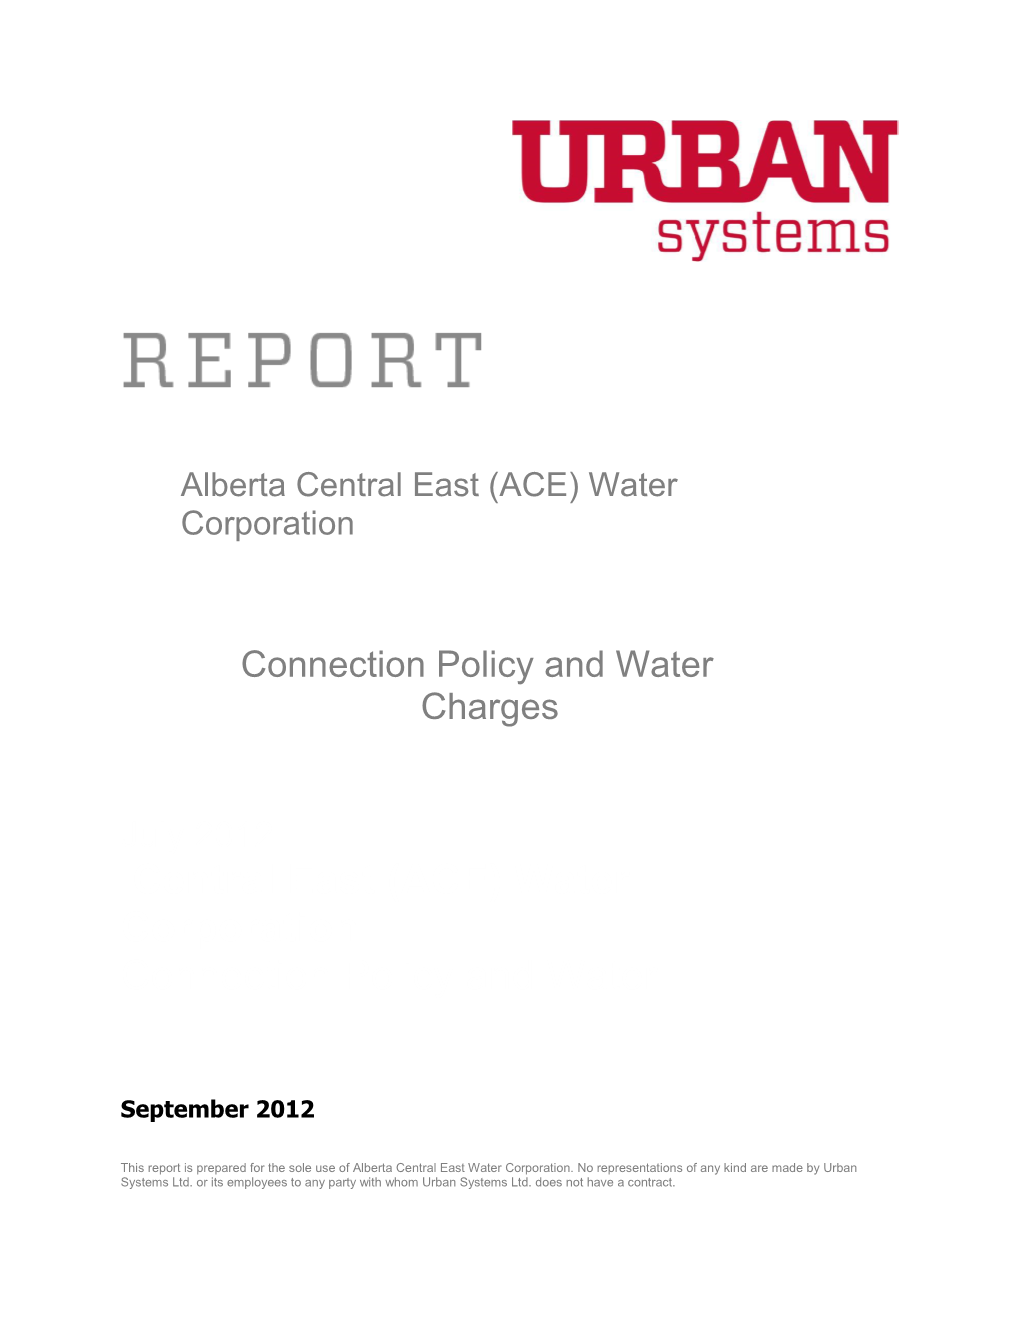 Alberta Central East (ACE) Water Corporation